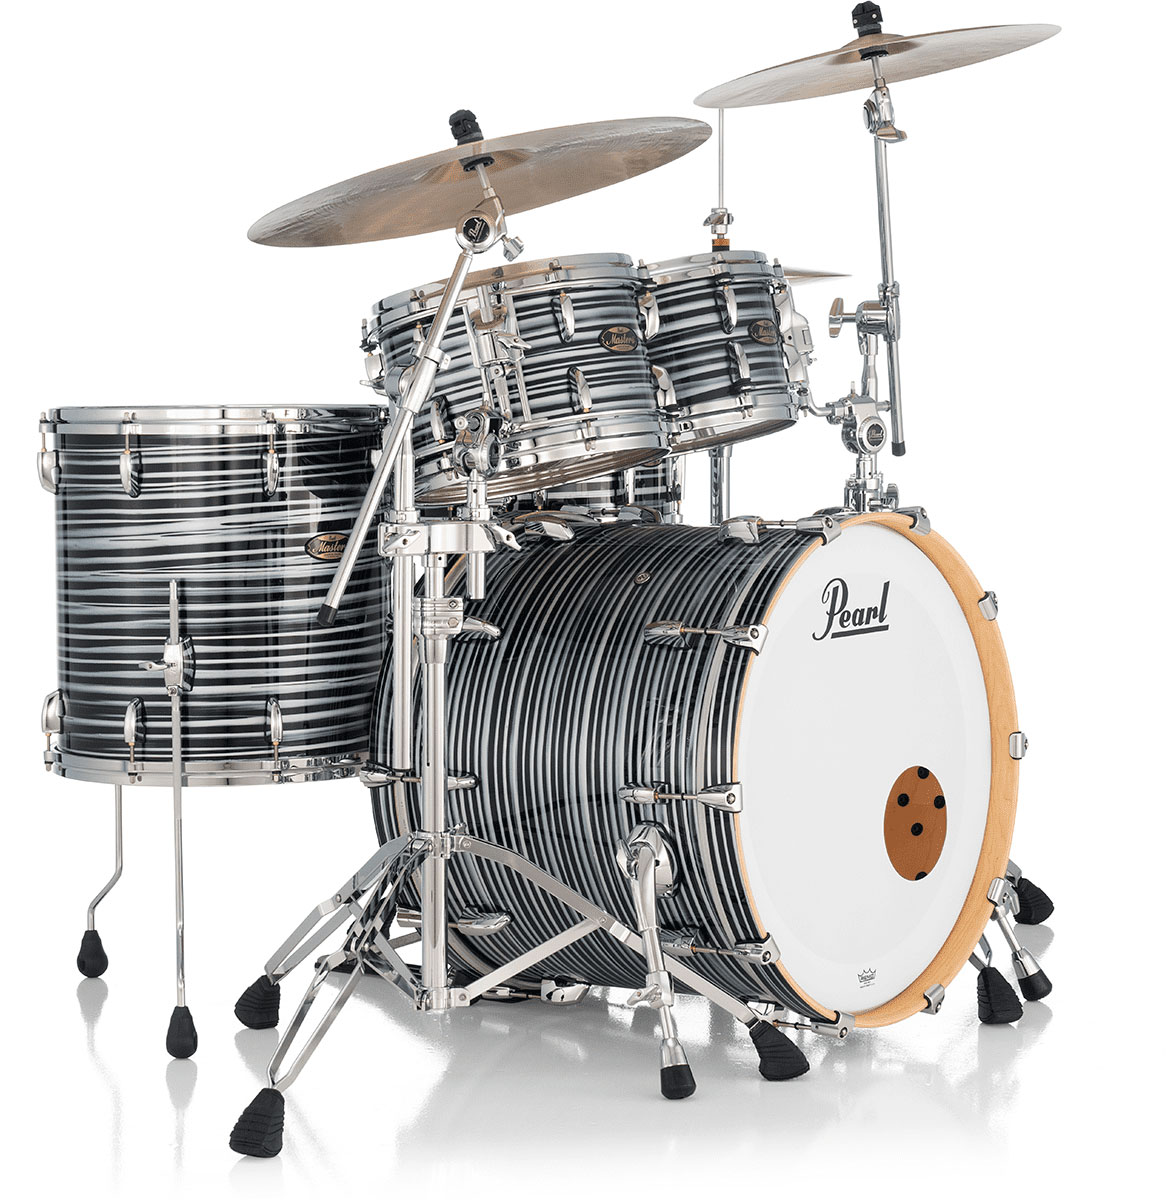 PEARL DRUMS MASTERS MAPLE GUM STAGE 22 GYROLOCK-L BLACK OYSTER SWIRL